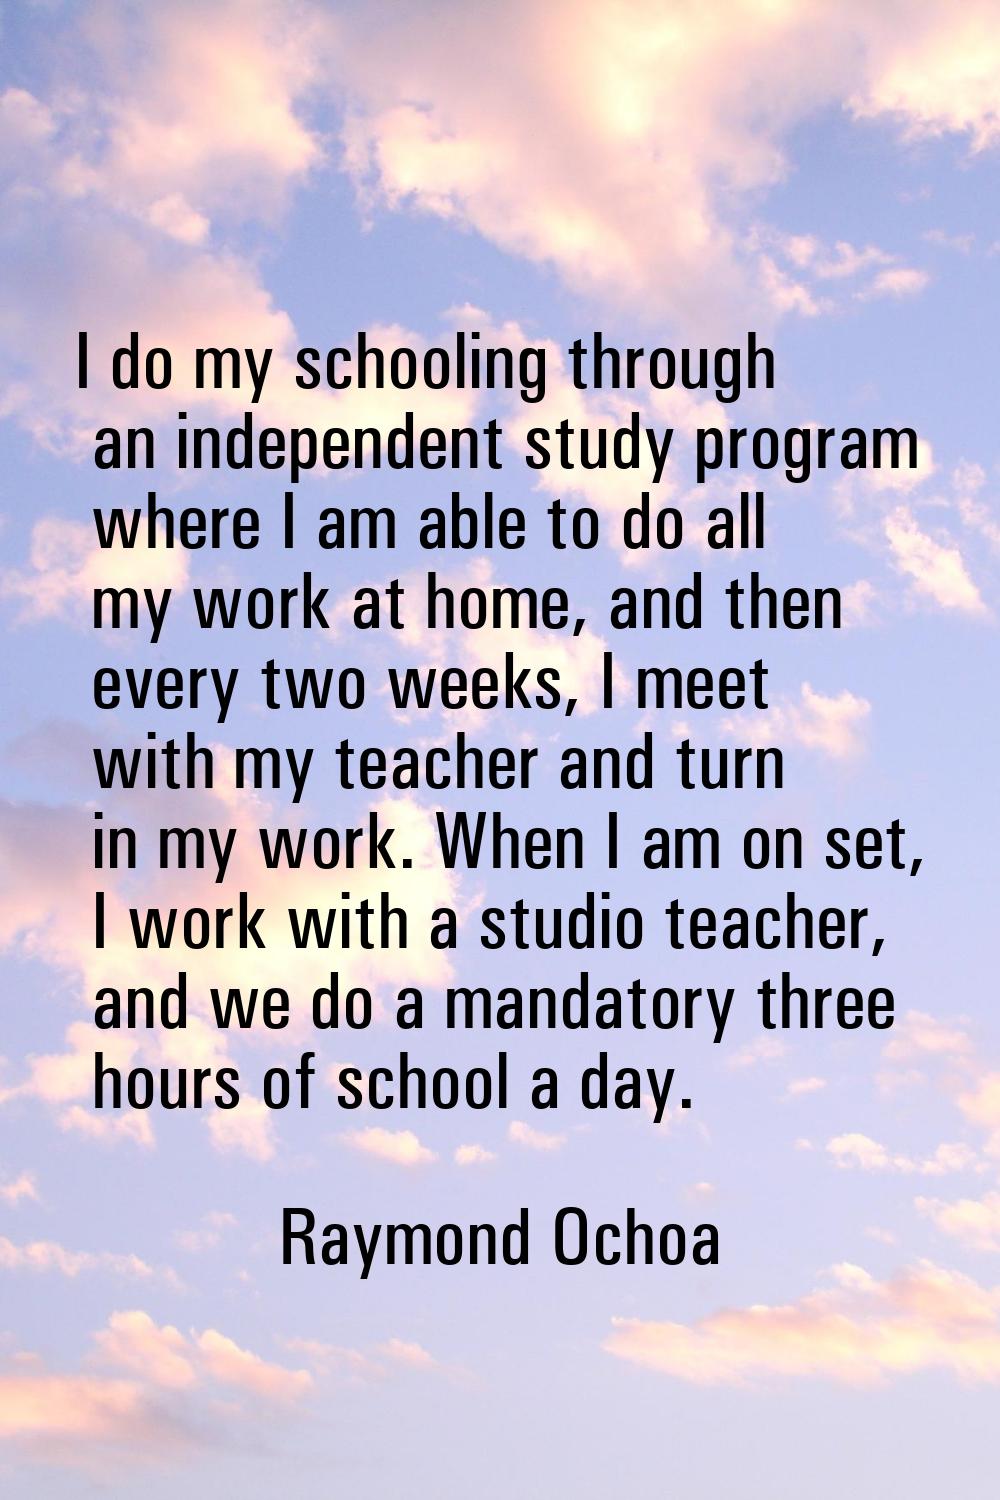 I do my schooling through an independent study program where I am able to do all my work at home, a